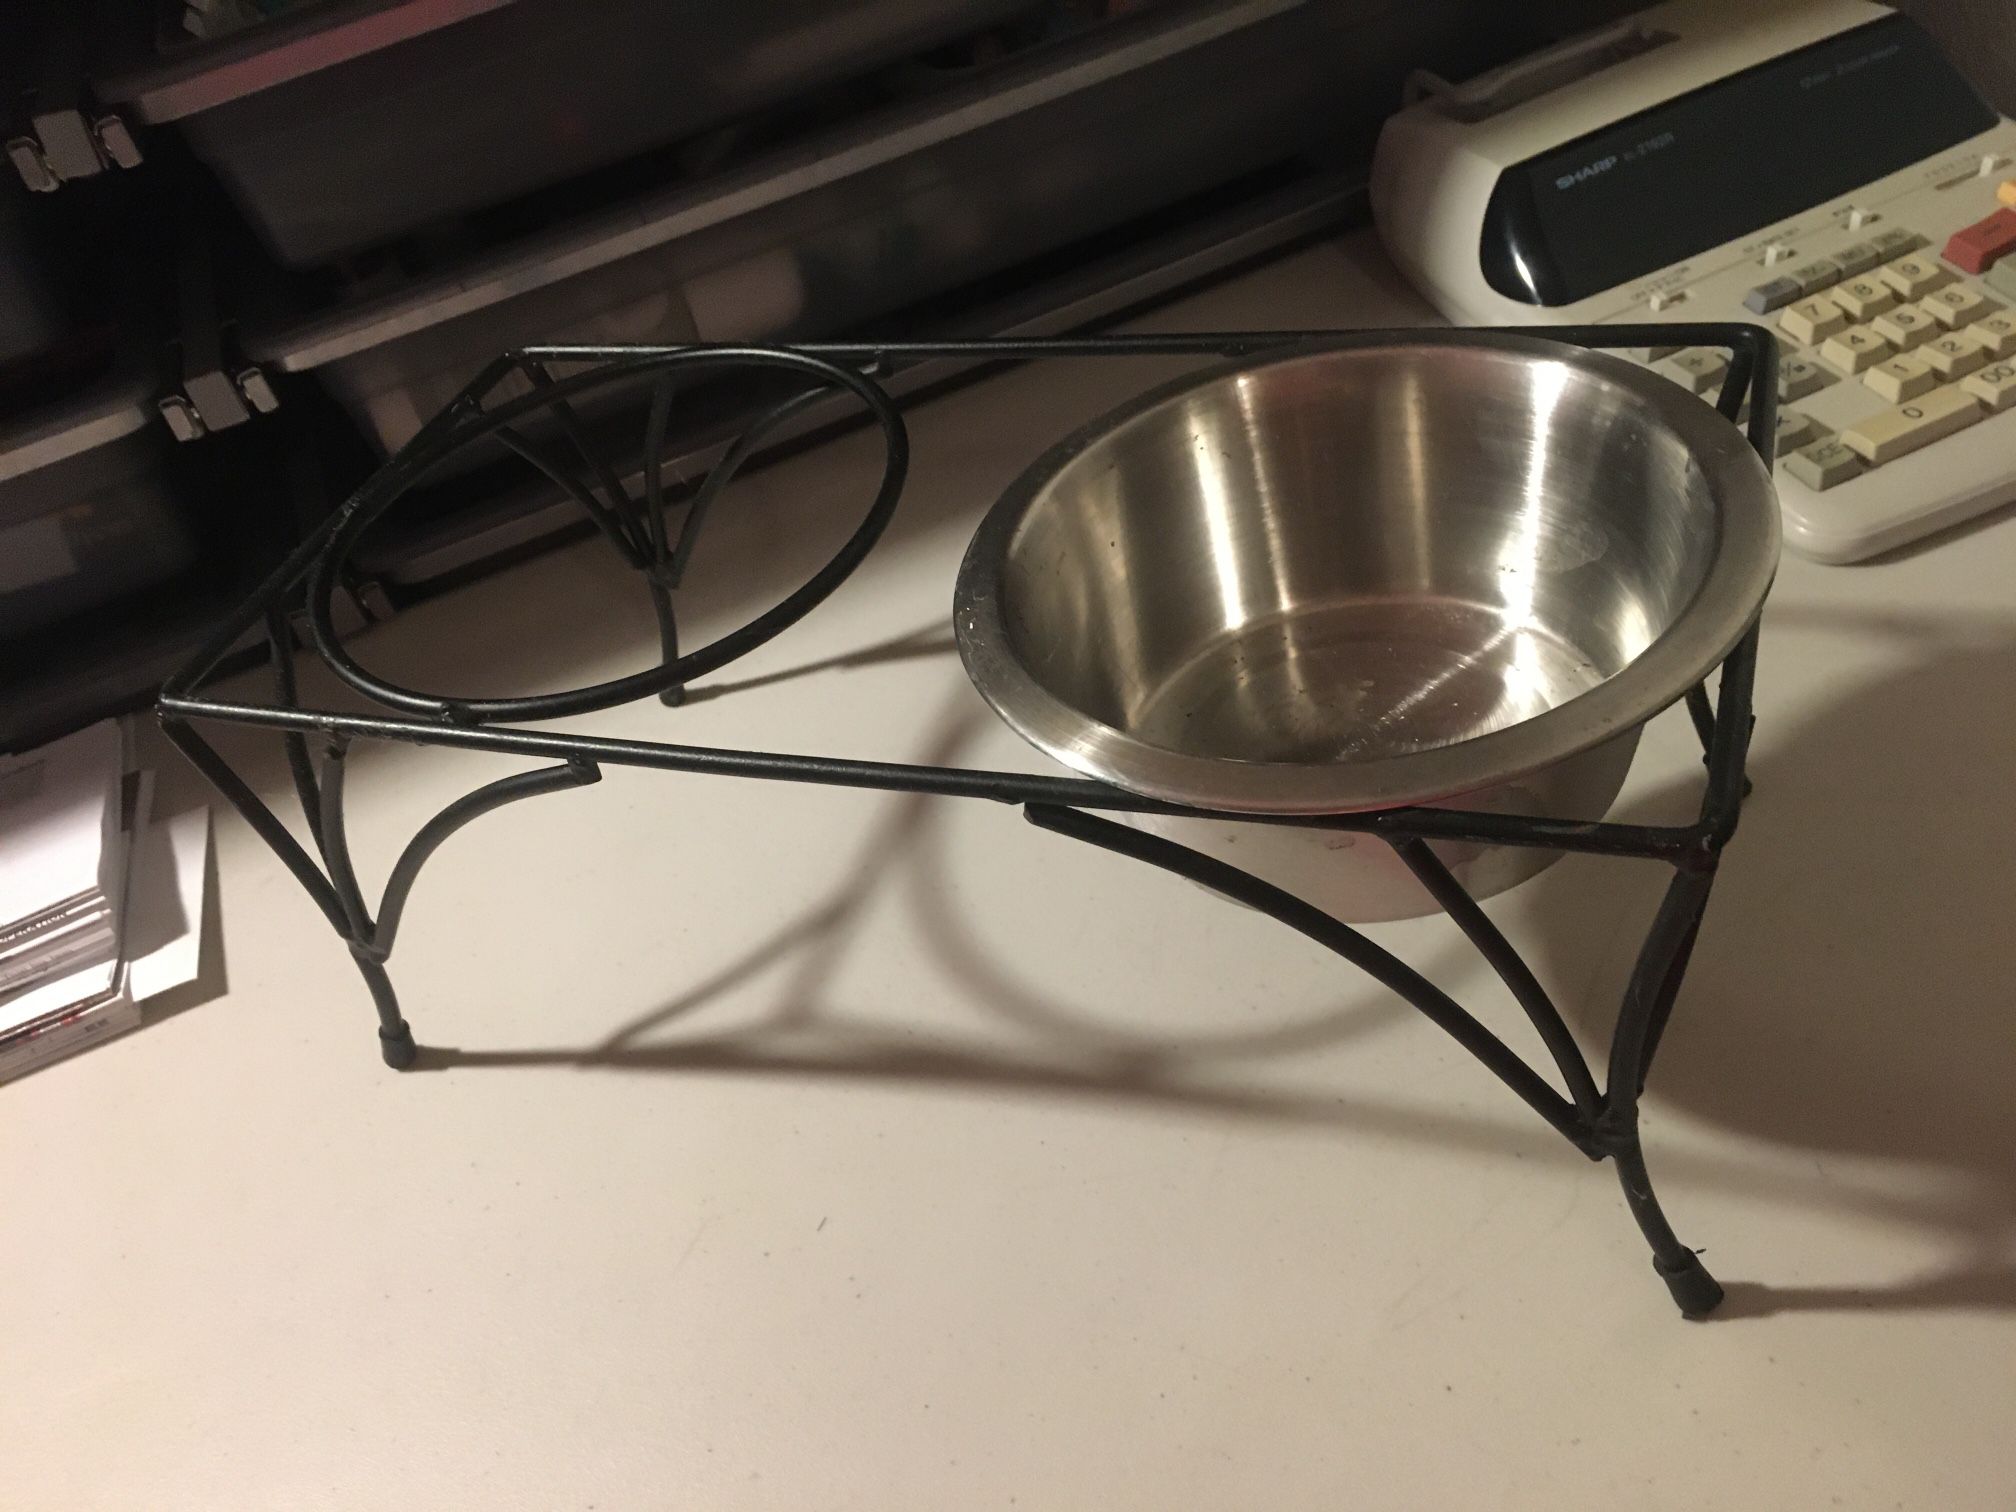 Dog Bowl Holder With Only One Dish